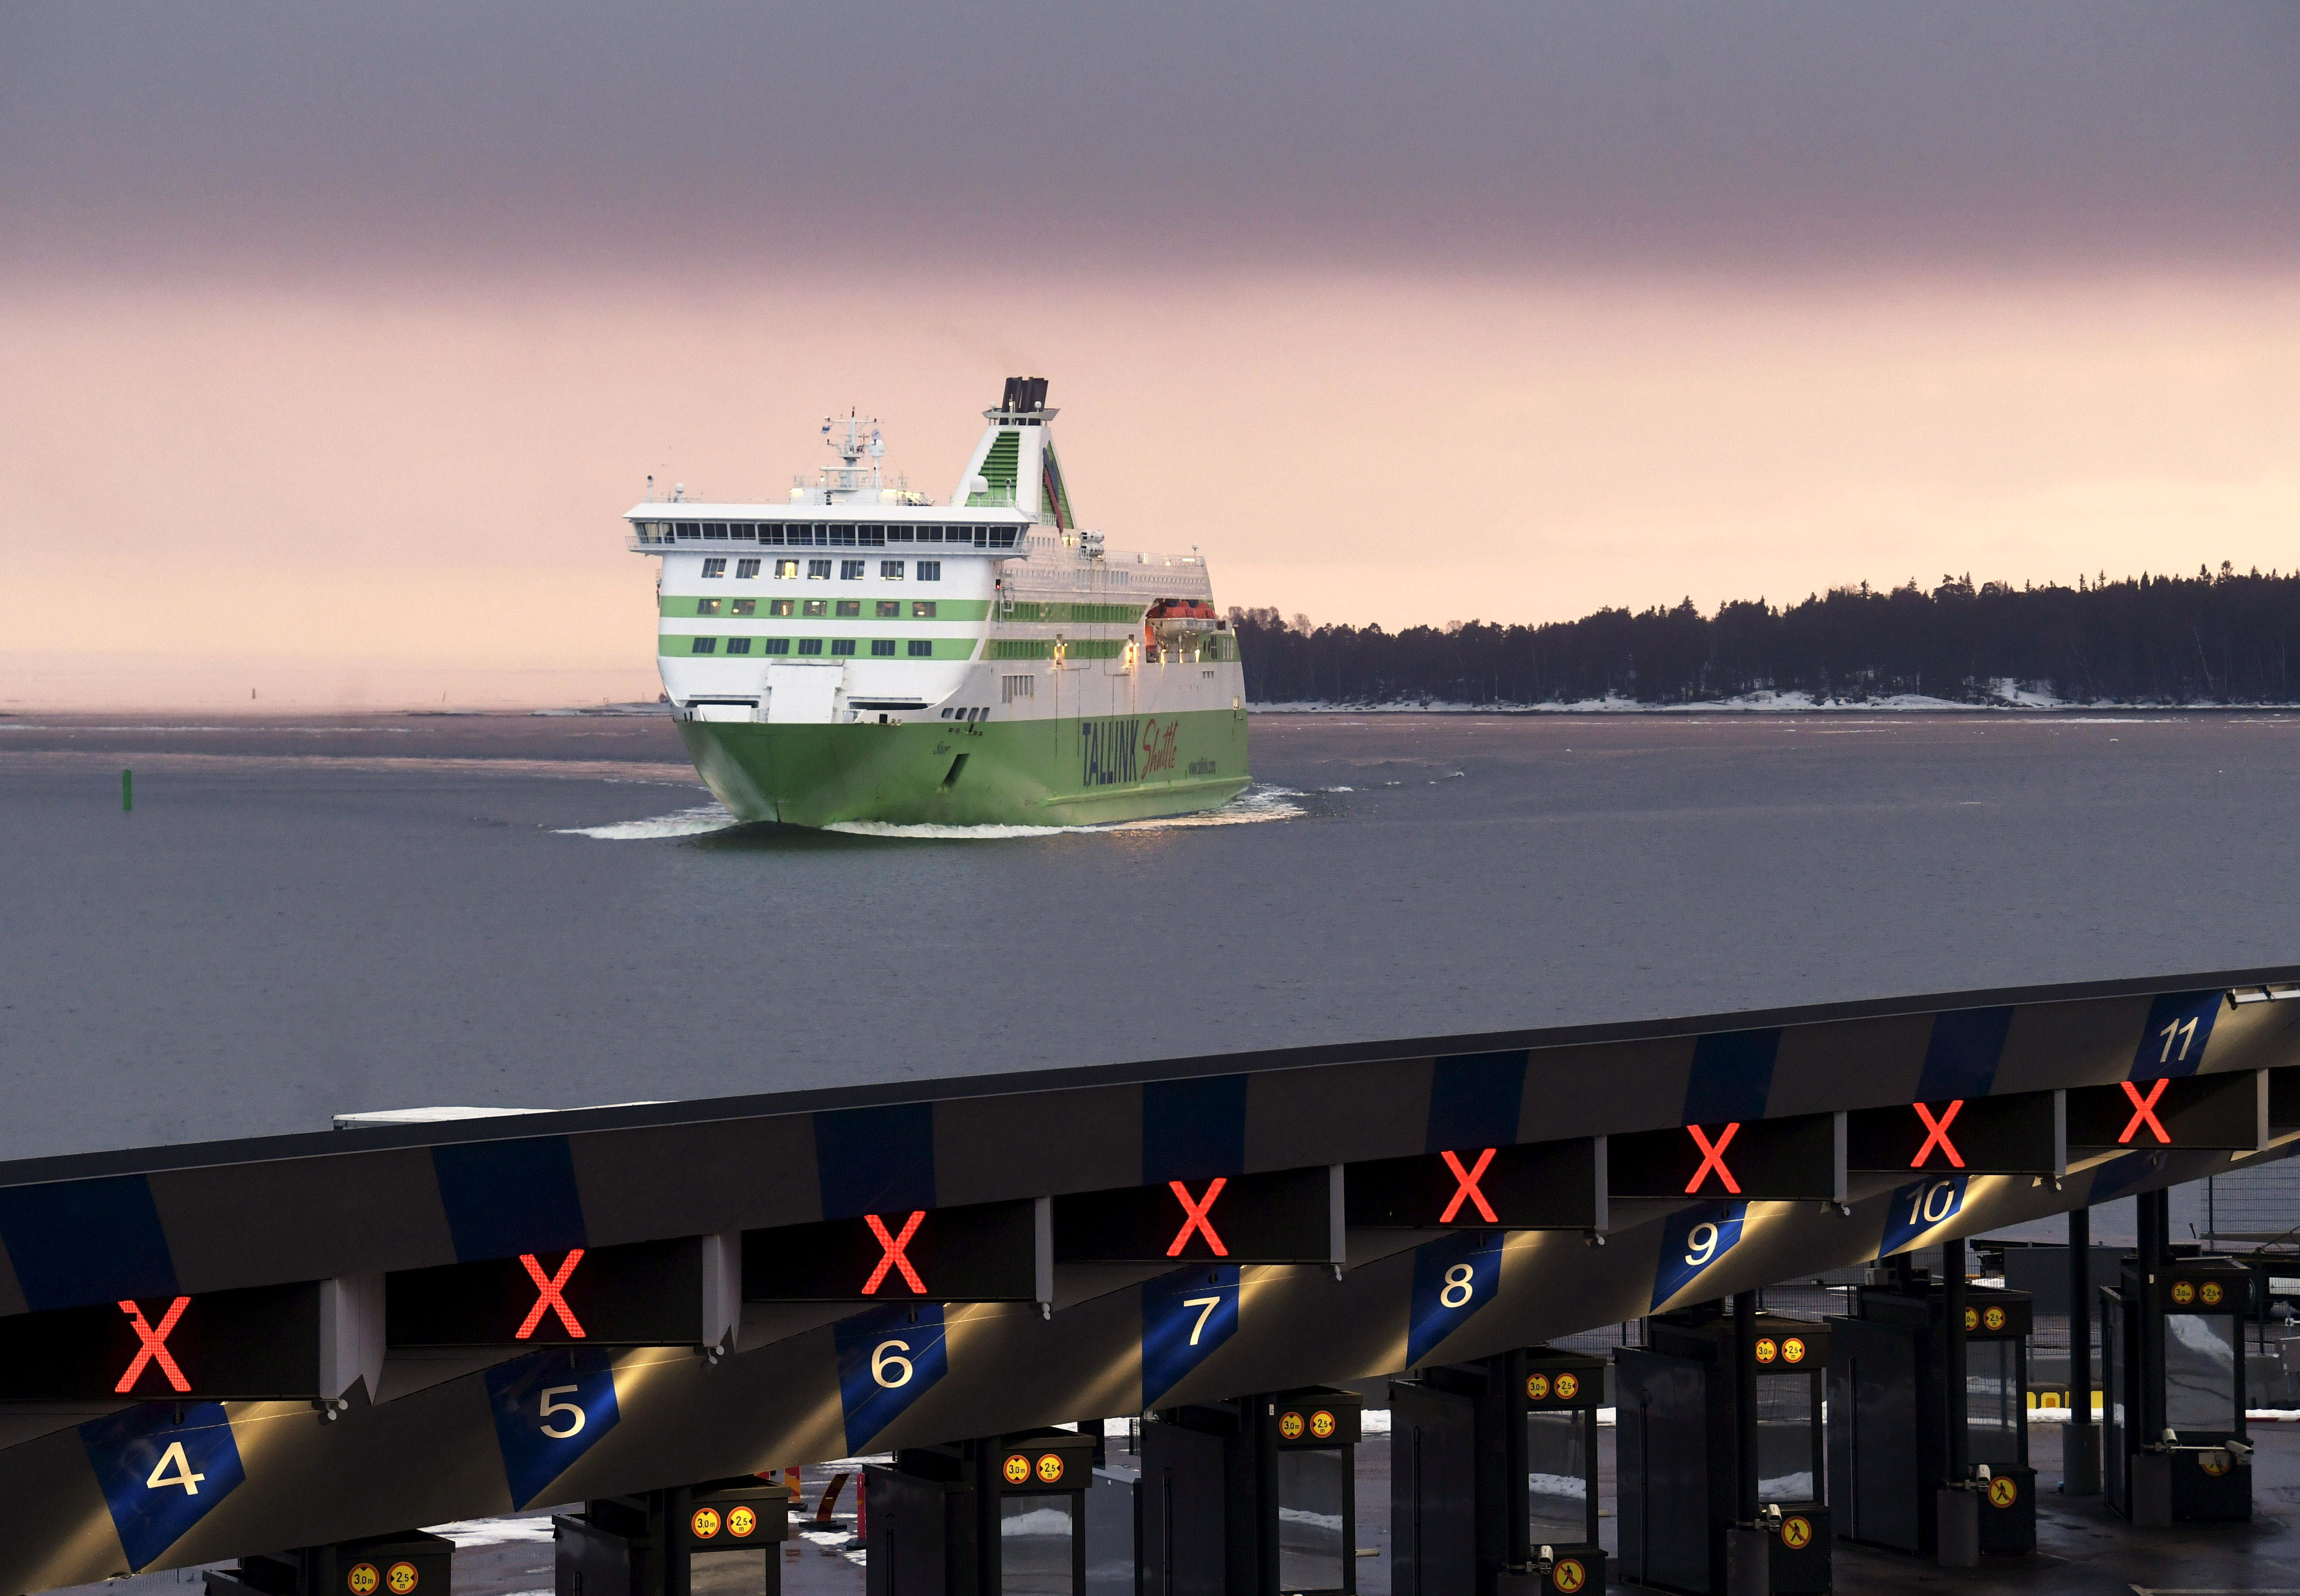 Marin: Finland is looking at opening Tallinn ferries for work-based travel